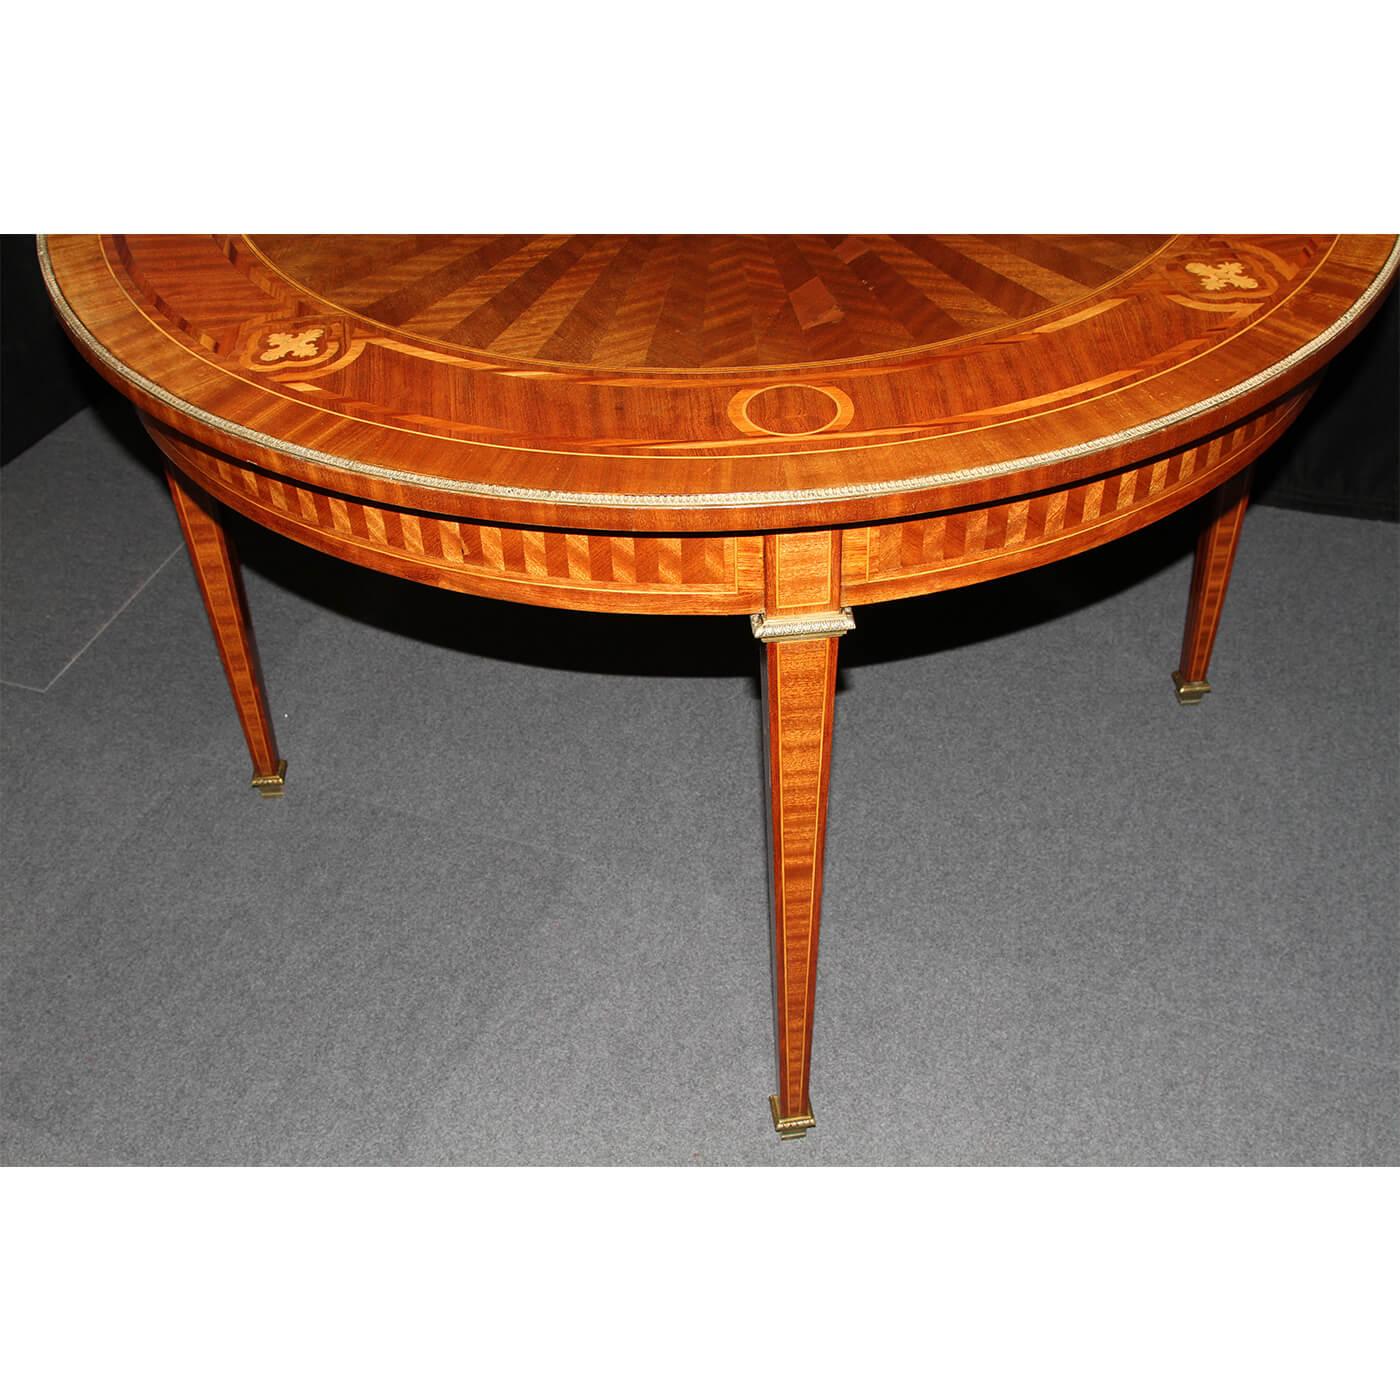 A fine Louis XVI style parquetry inlaid round center table with an inlaid and rayed top of various exotic woods, with marquetry inlaid crossbandings, with bronze ormolu trim, capitals with a parquetry inlaid apron and raised on square tapered legs.